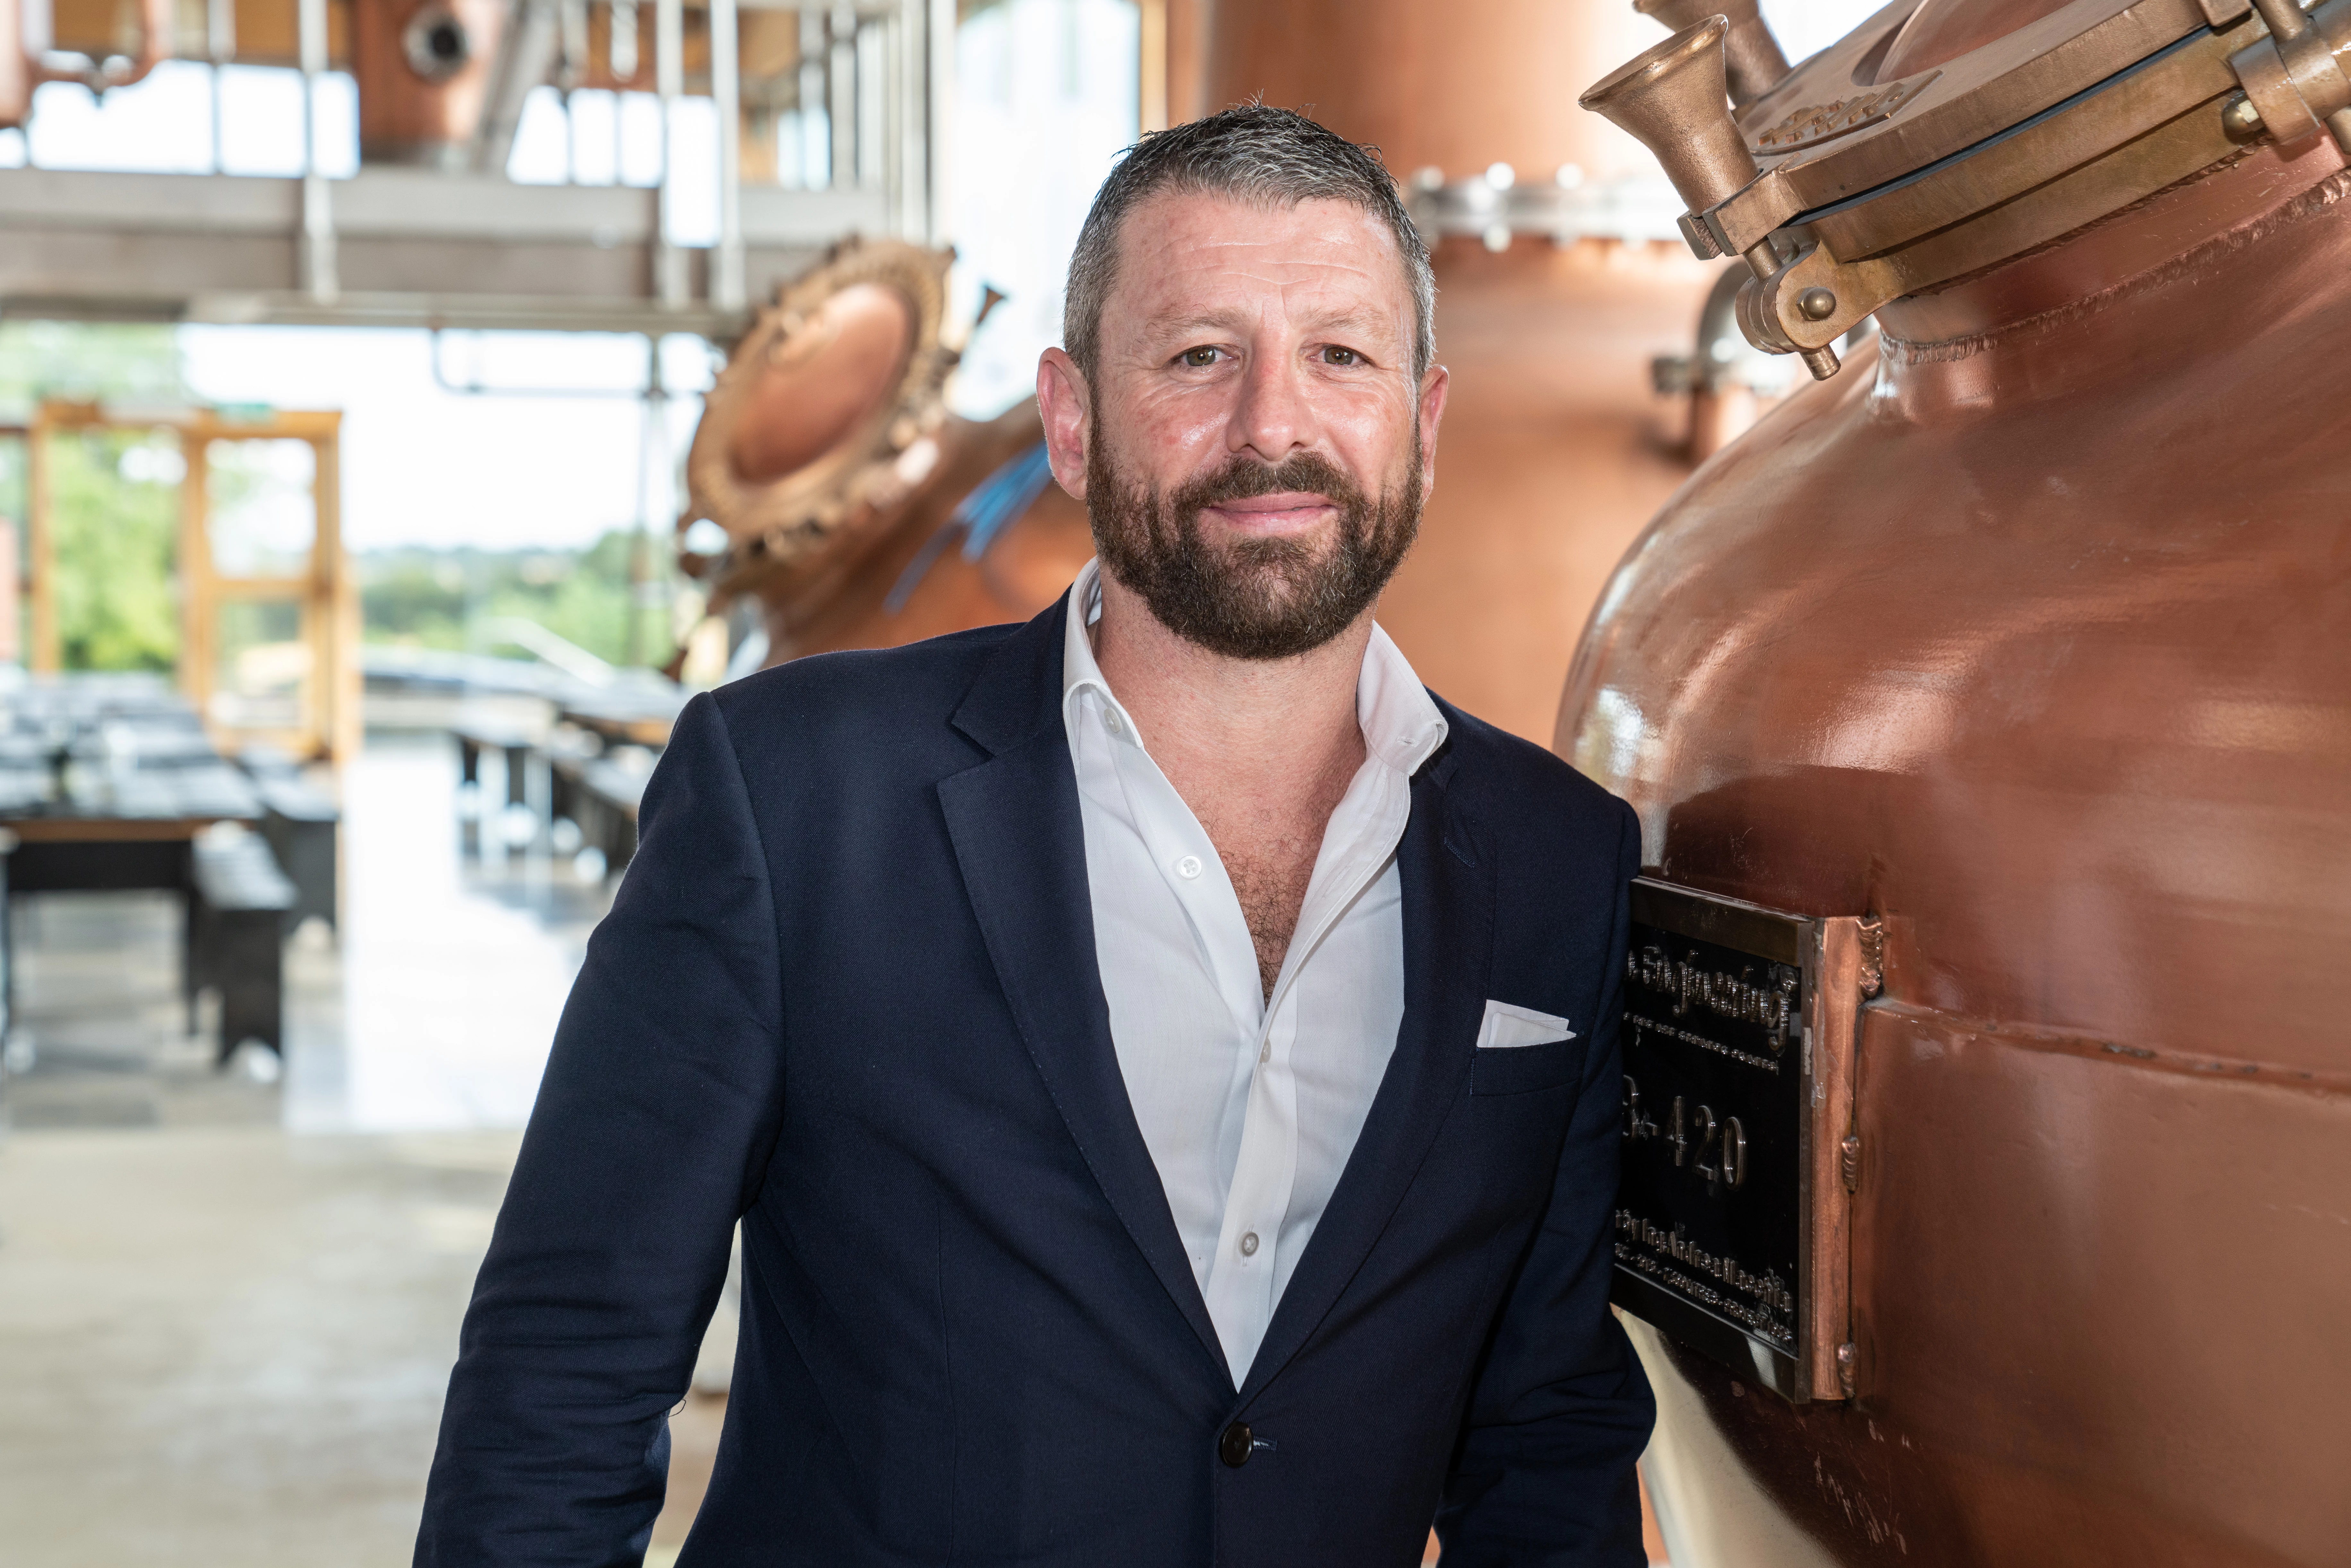 Whiskey & Wealth Club co-founder and CEO Scott Sciberras